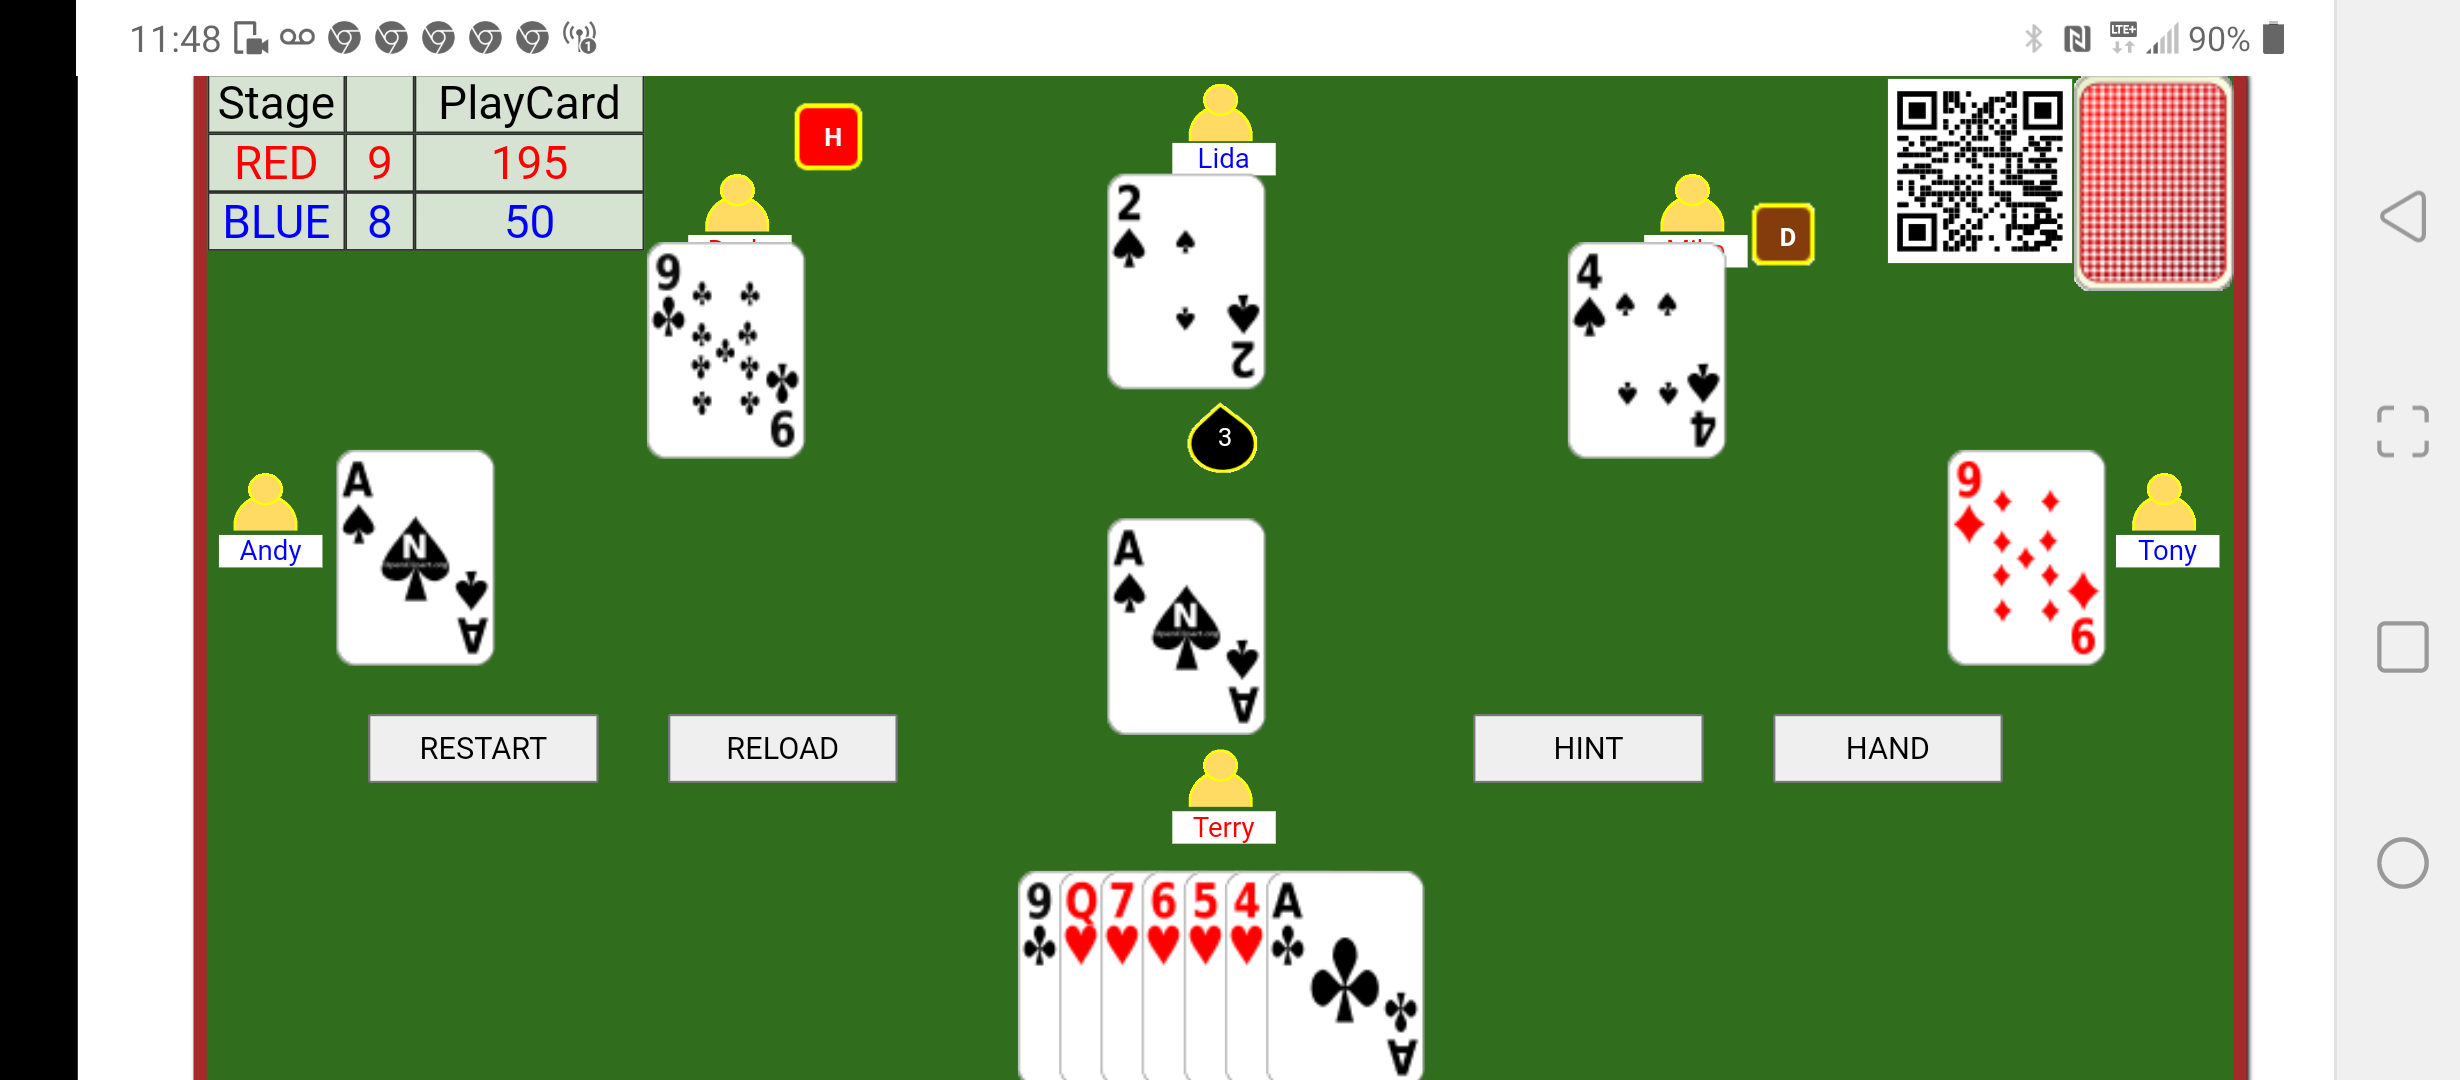 html5 tractor card game Screenshot_20220120-114850.png